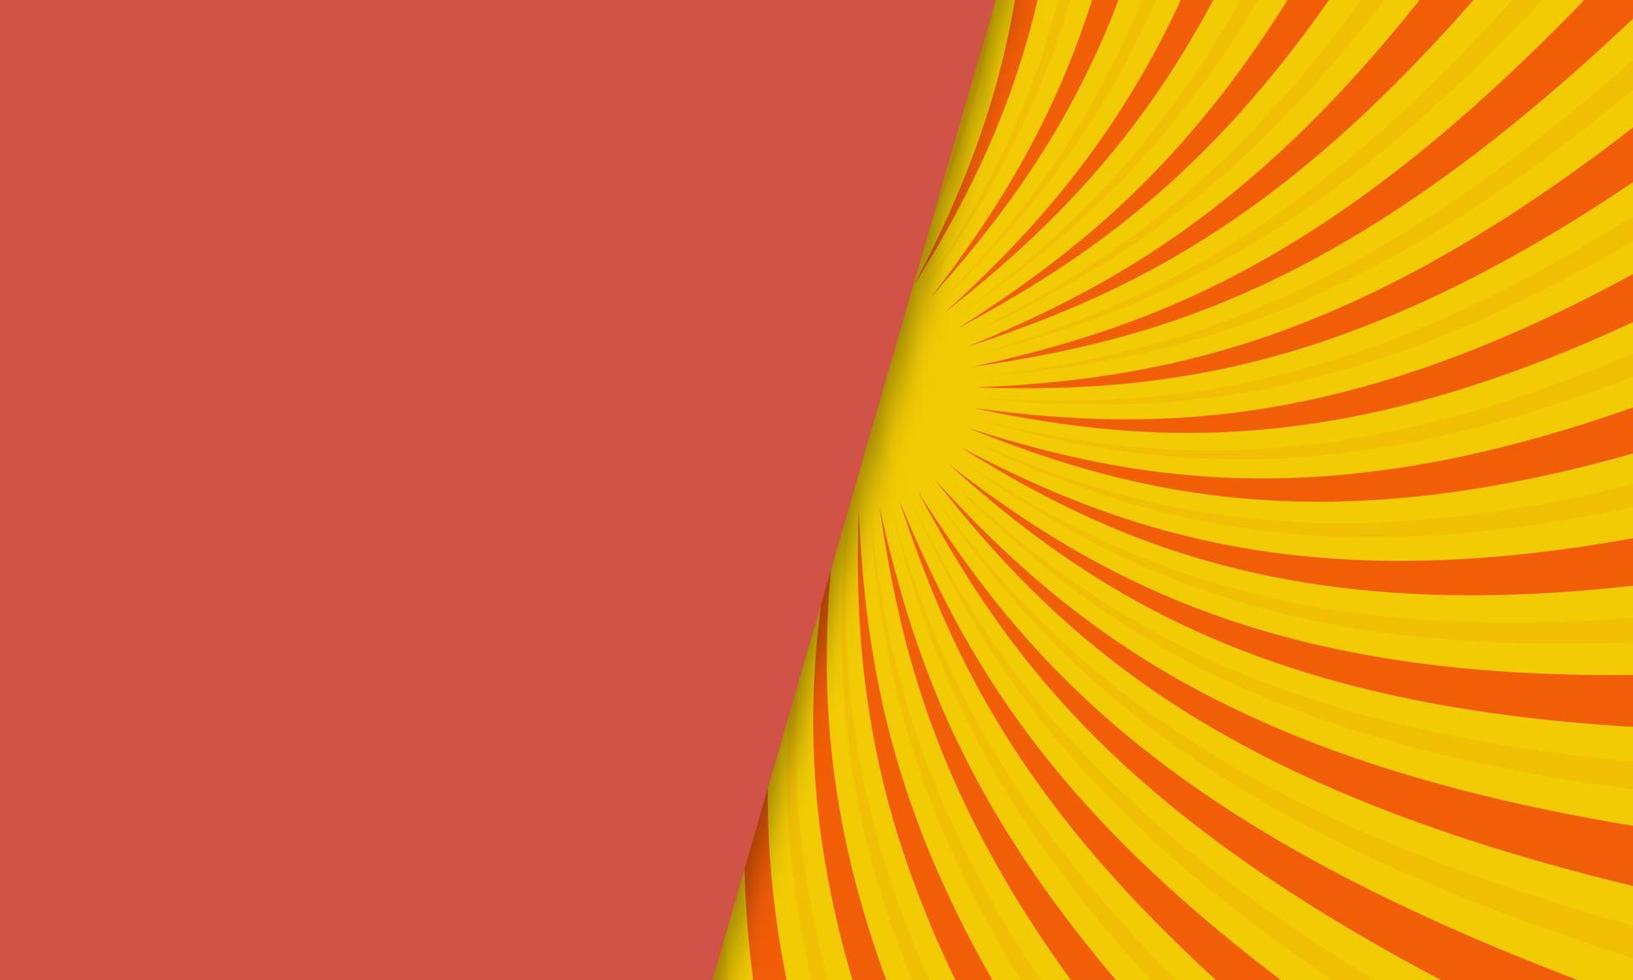 Red orange yellow abstract vector Overlapping style background background with rays. vector illustration retro grunge with a white circle background. Abstract sunburst design. Vintage rising sun